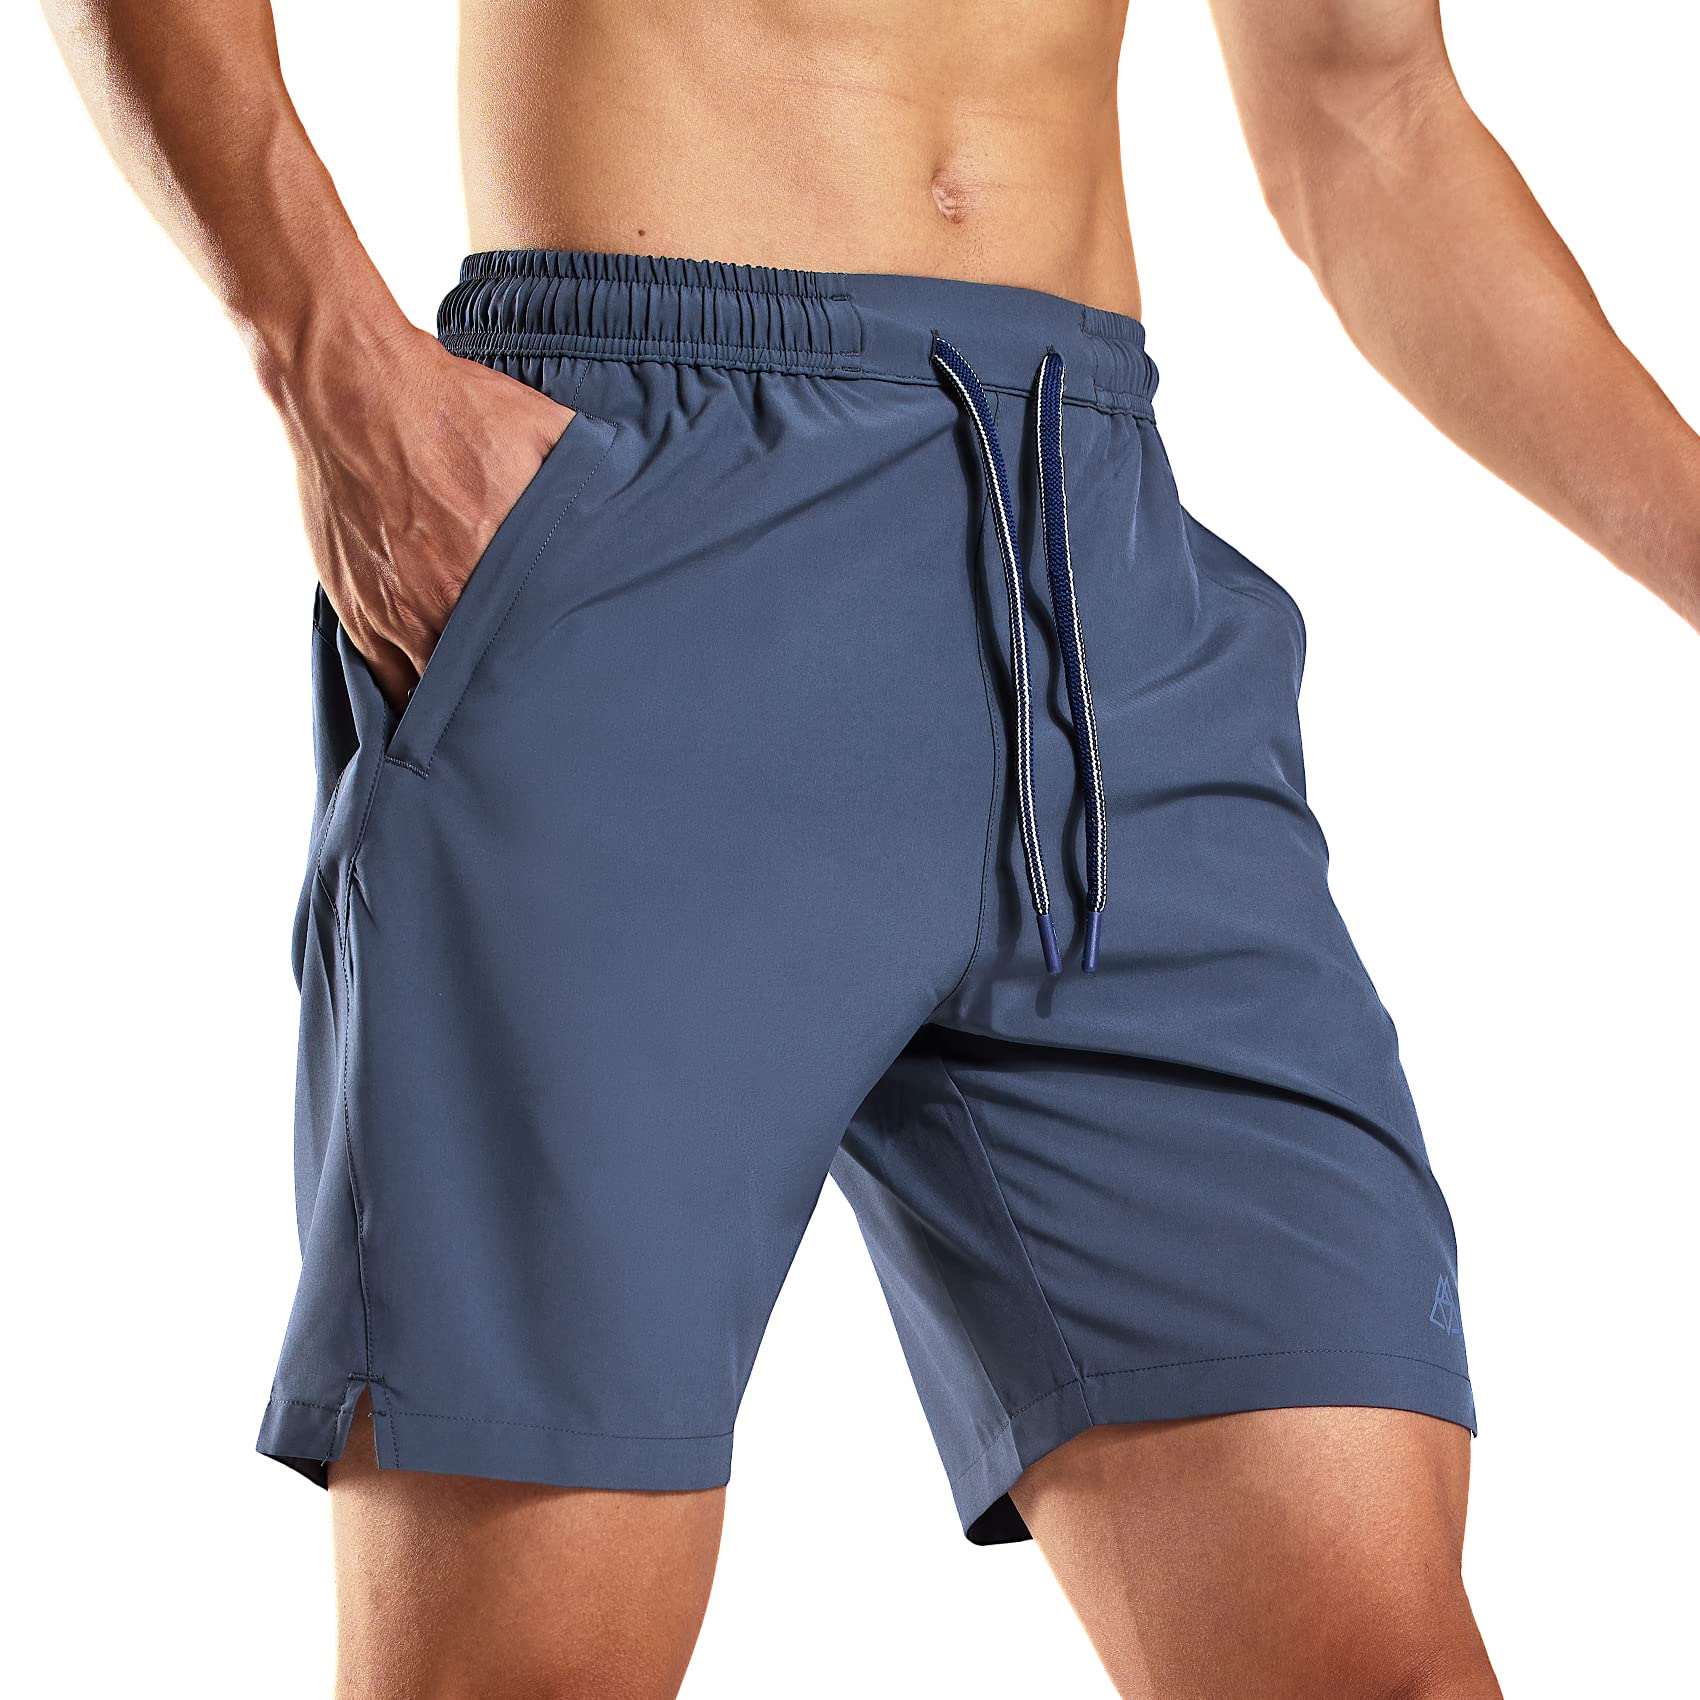 Haimont Men's Dry Fit Running Shorts with Zipper Pockets